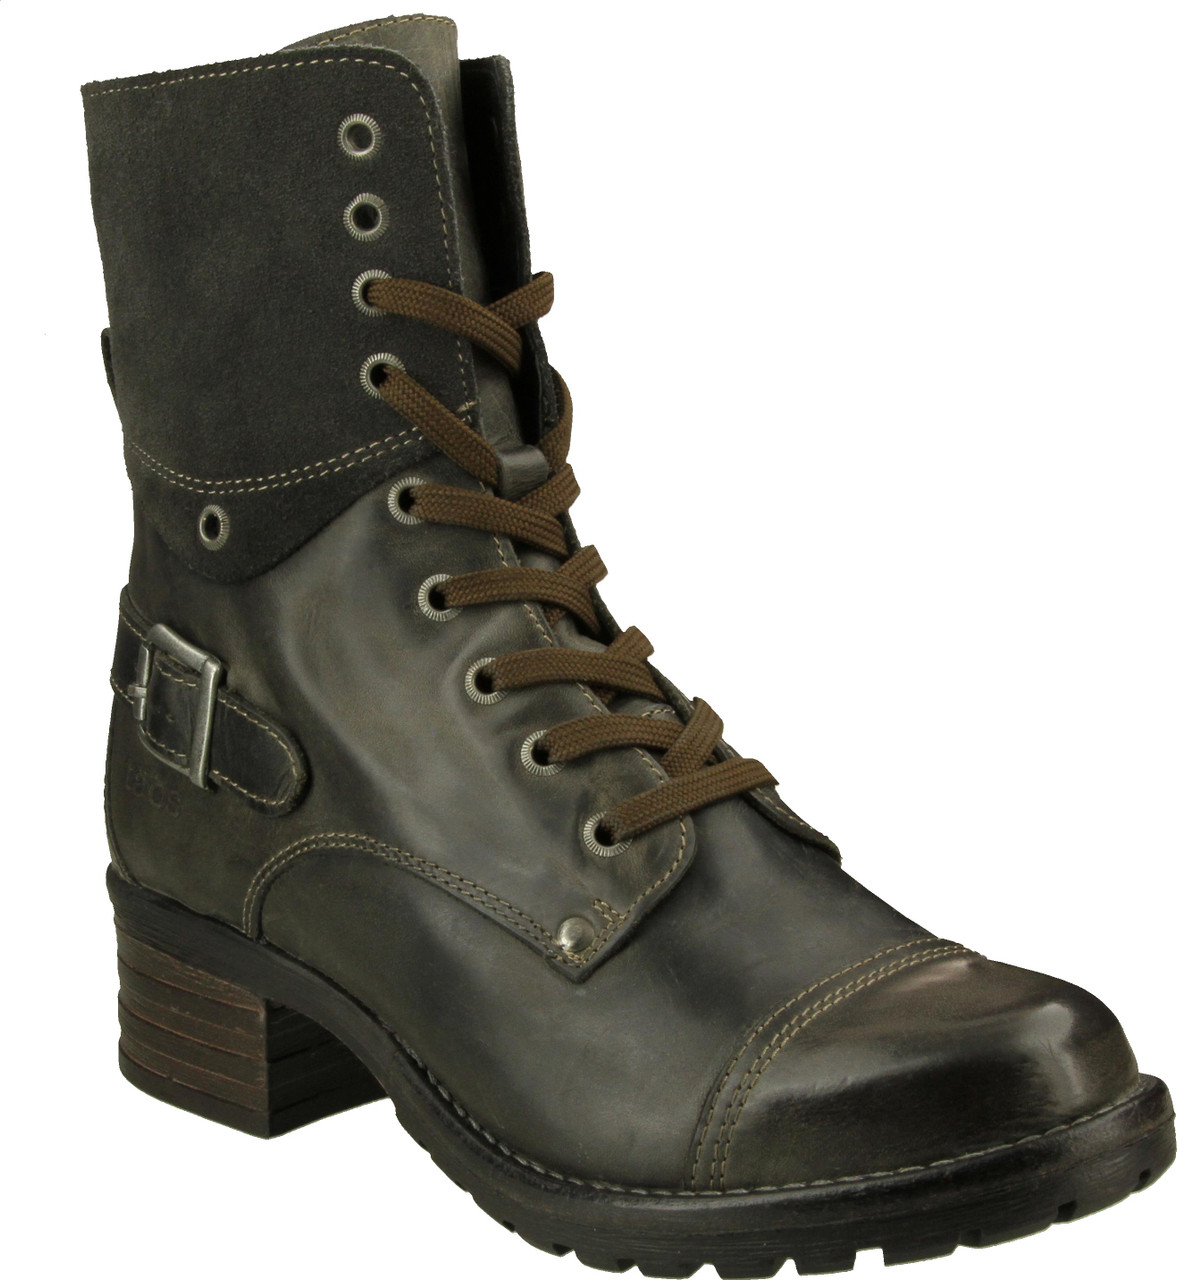 Taos Crave - FREE Shipping & FREE Returns - Women's Boots